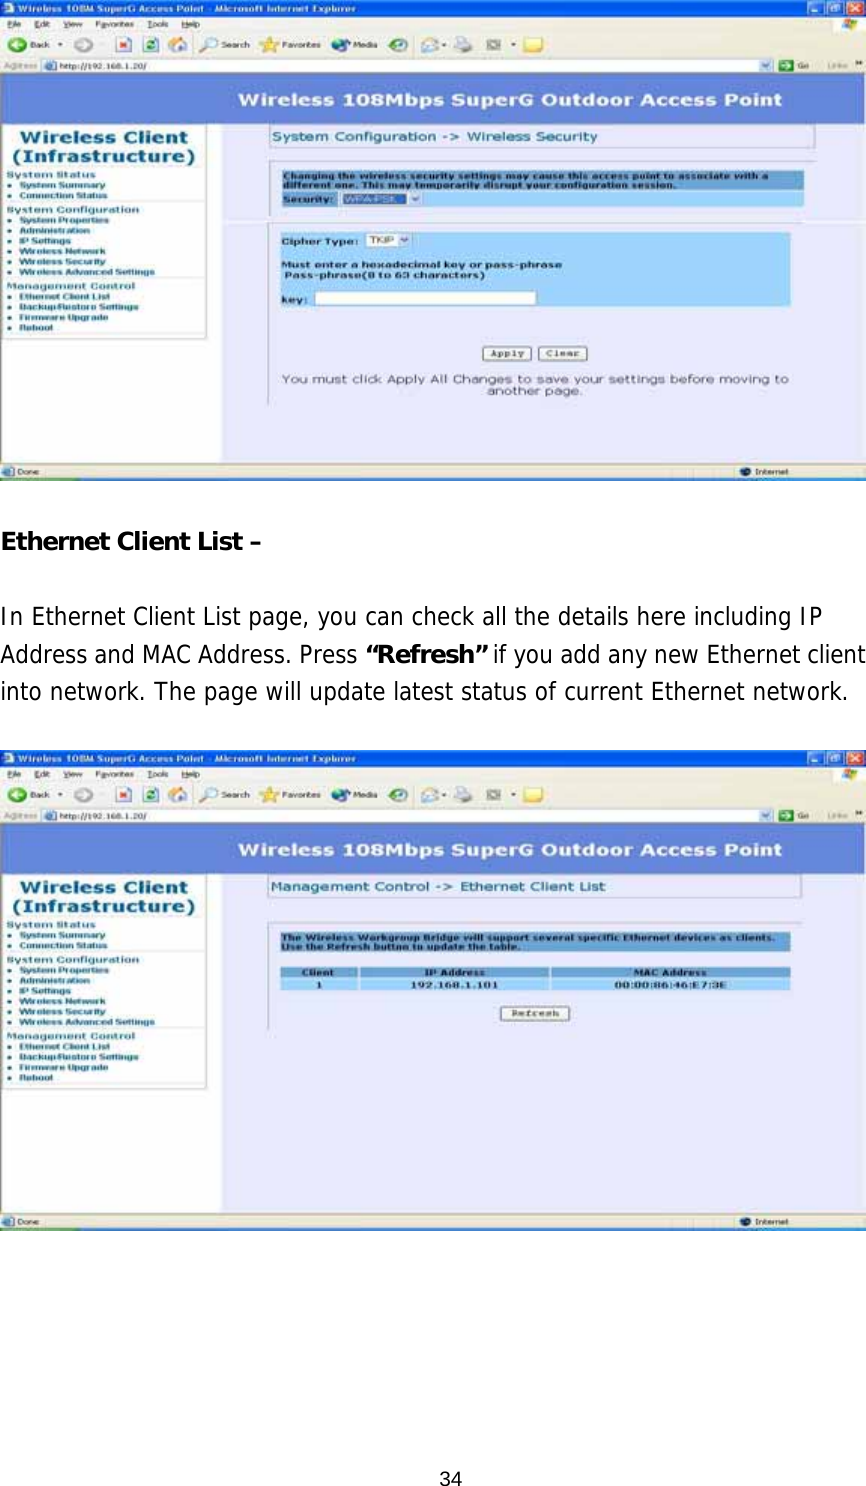  34  Ethernet Client List –  In Ethernet Client List page, you can check all the details here including IP Address and MAC Address. Press “Refresh” if you add any new Ethernet client into network. The page will update latest status of current Ethernet network.          